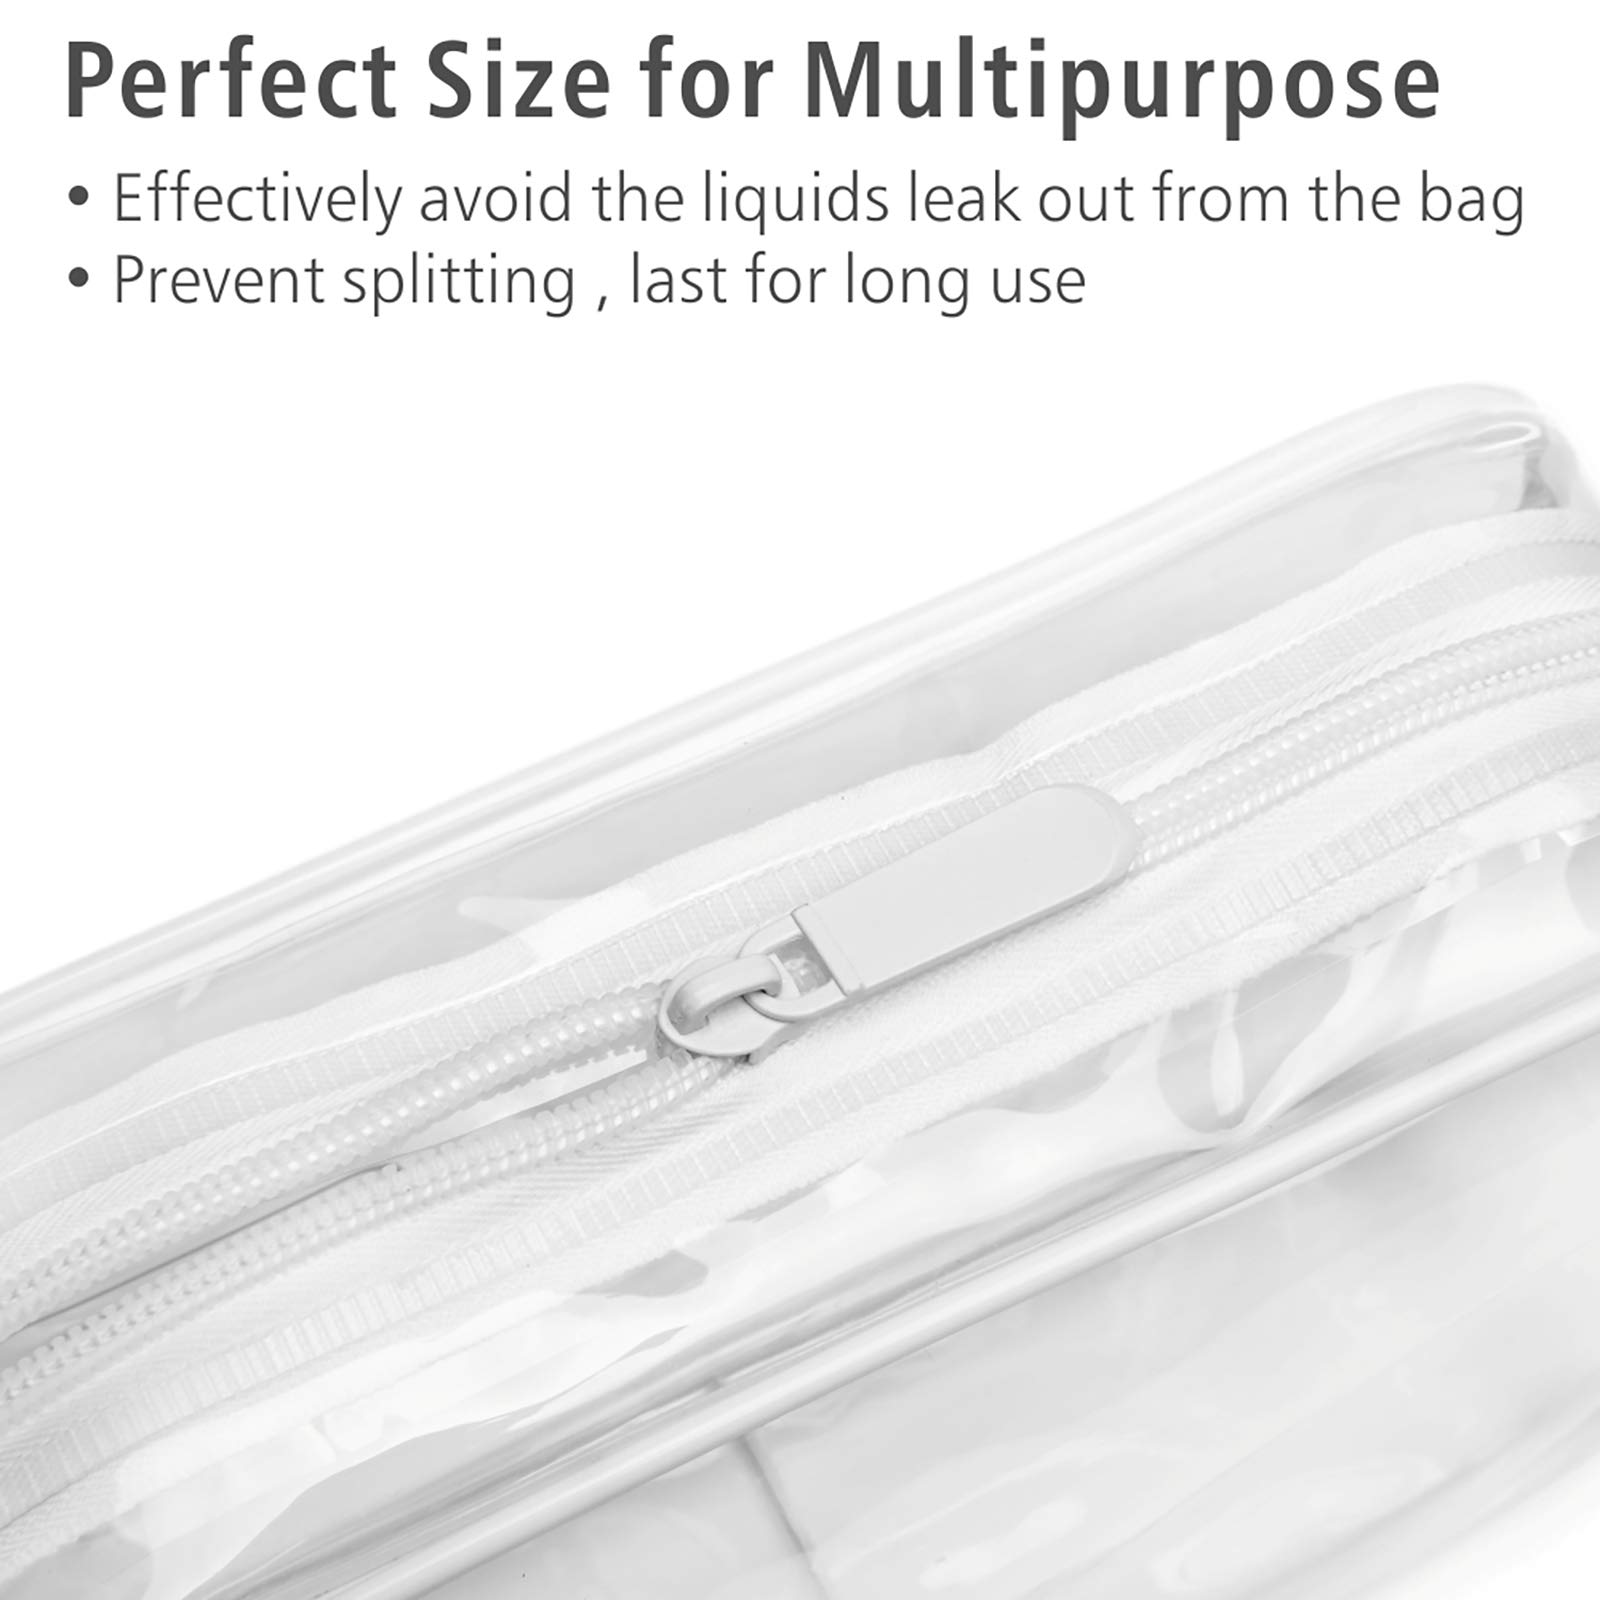 PACKISM TSA Approved Toiletry Bag, Clear Makeup Bag Waterproof Quart Size Bag, Travel Makeup Cosmetic Bag for Women Men, Carry on Airport Airline Compliant Bag, 3 Pack